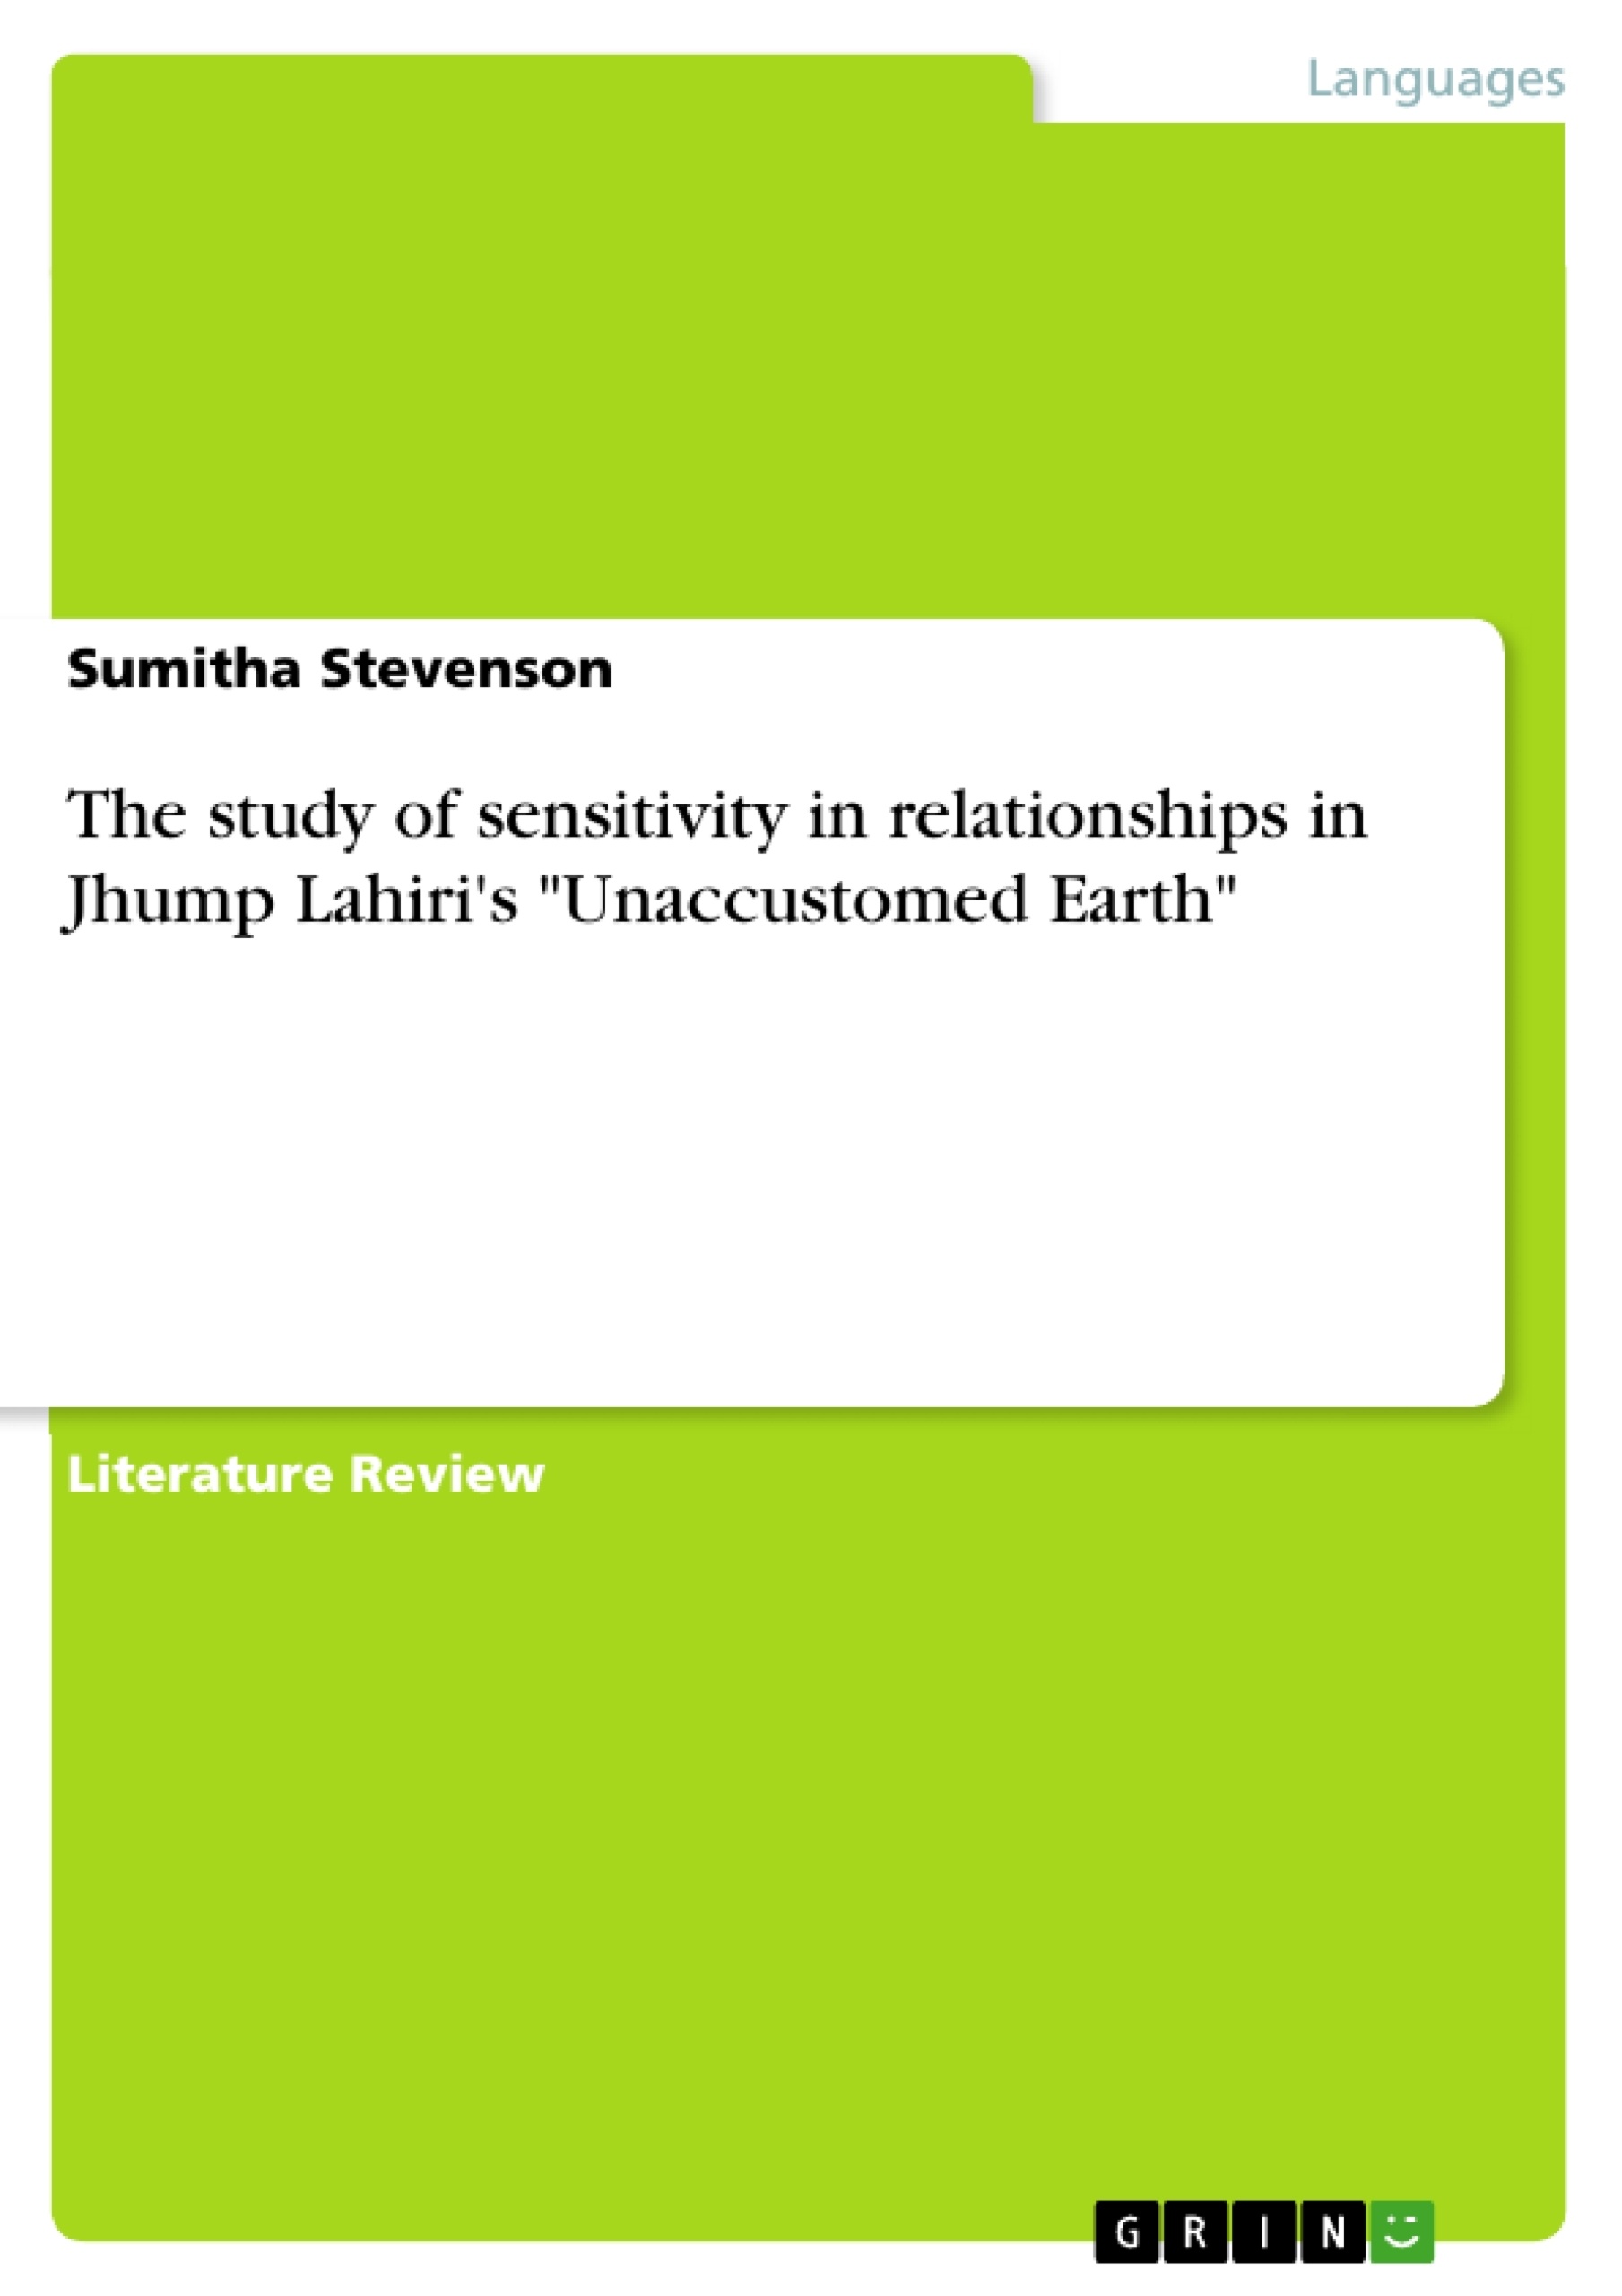 Titre: The study of sensitivity in relationships in Jhump Lahiri's "Unaccustomed Earth"